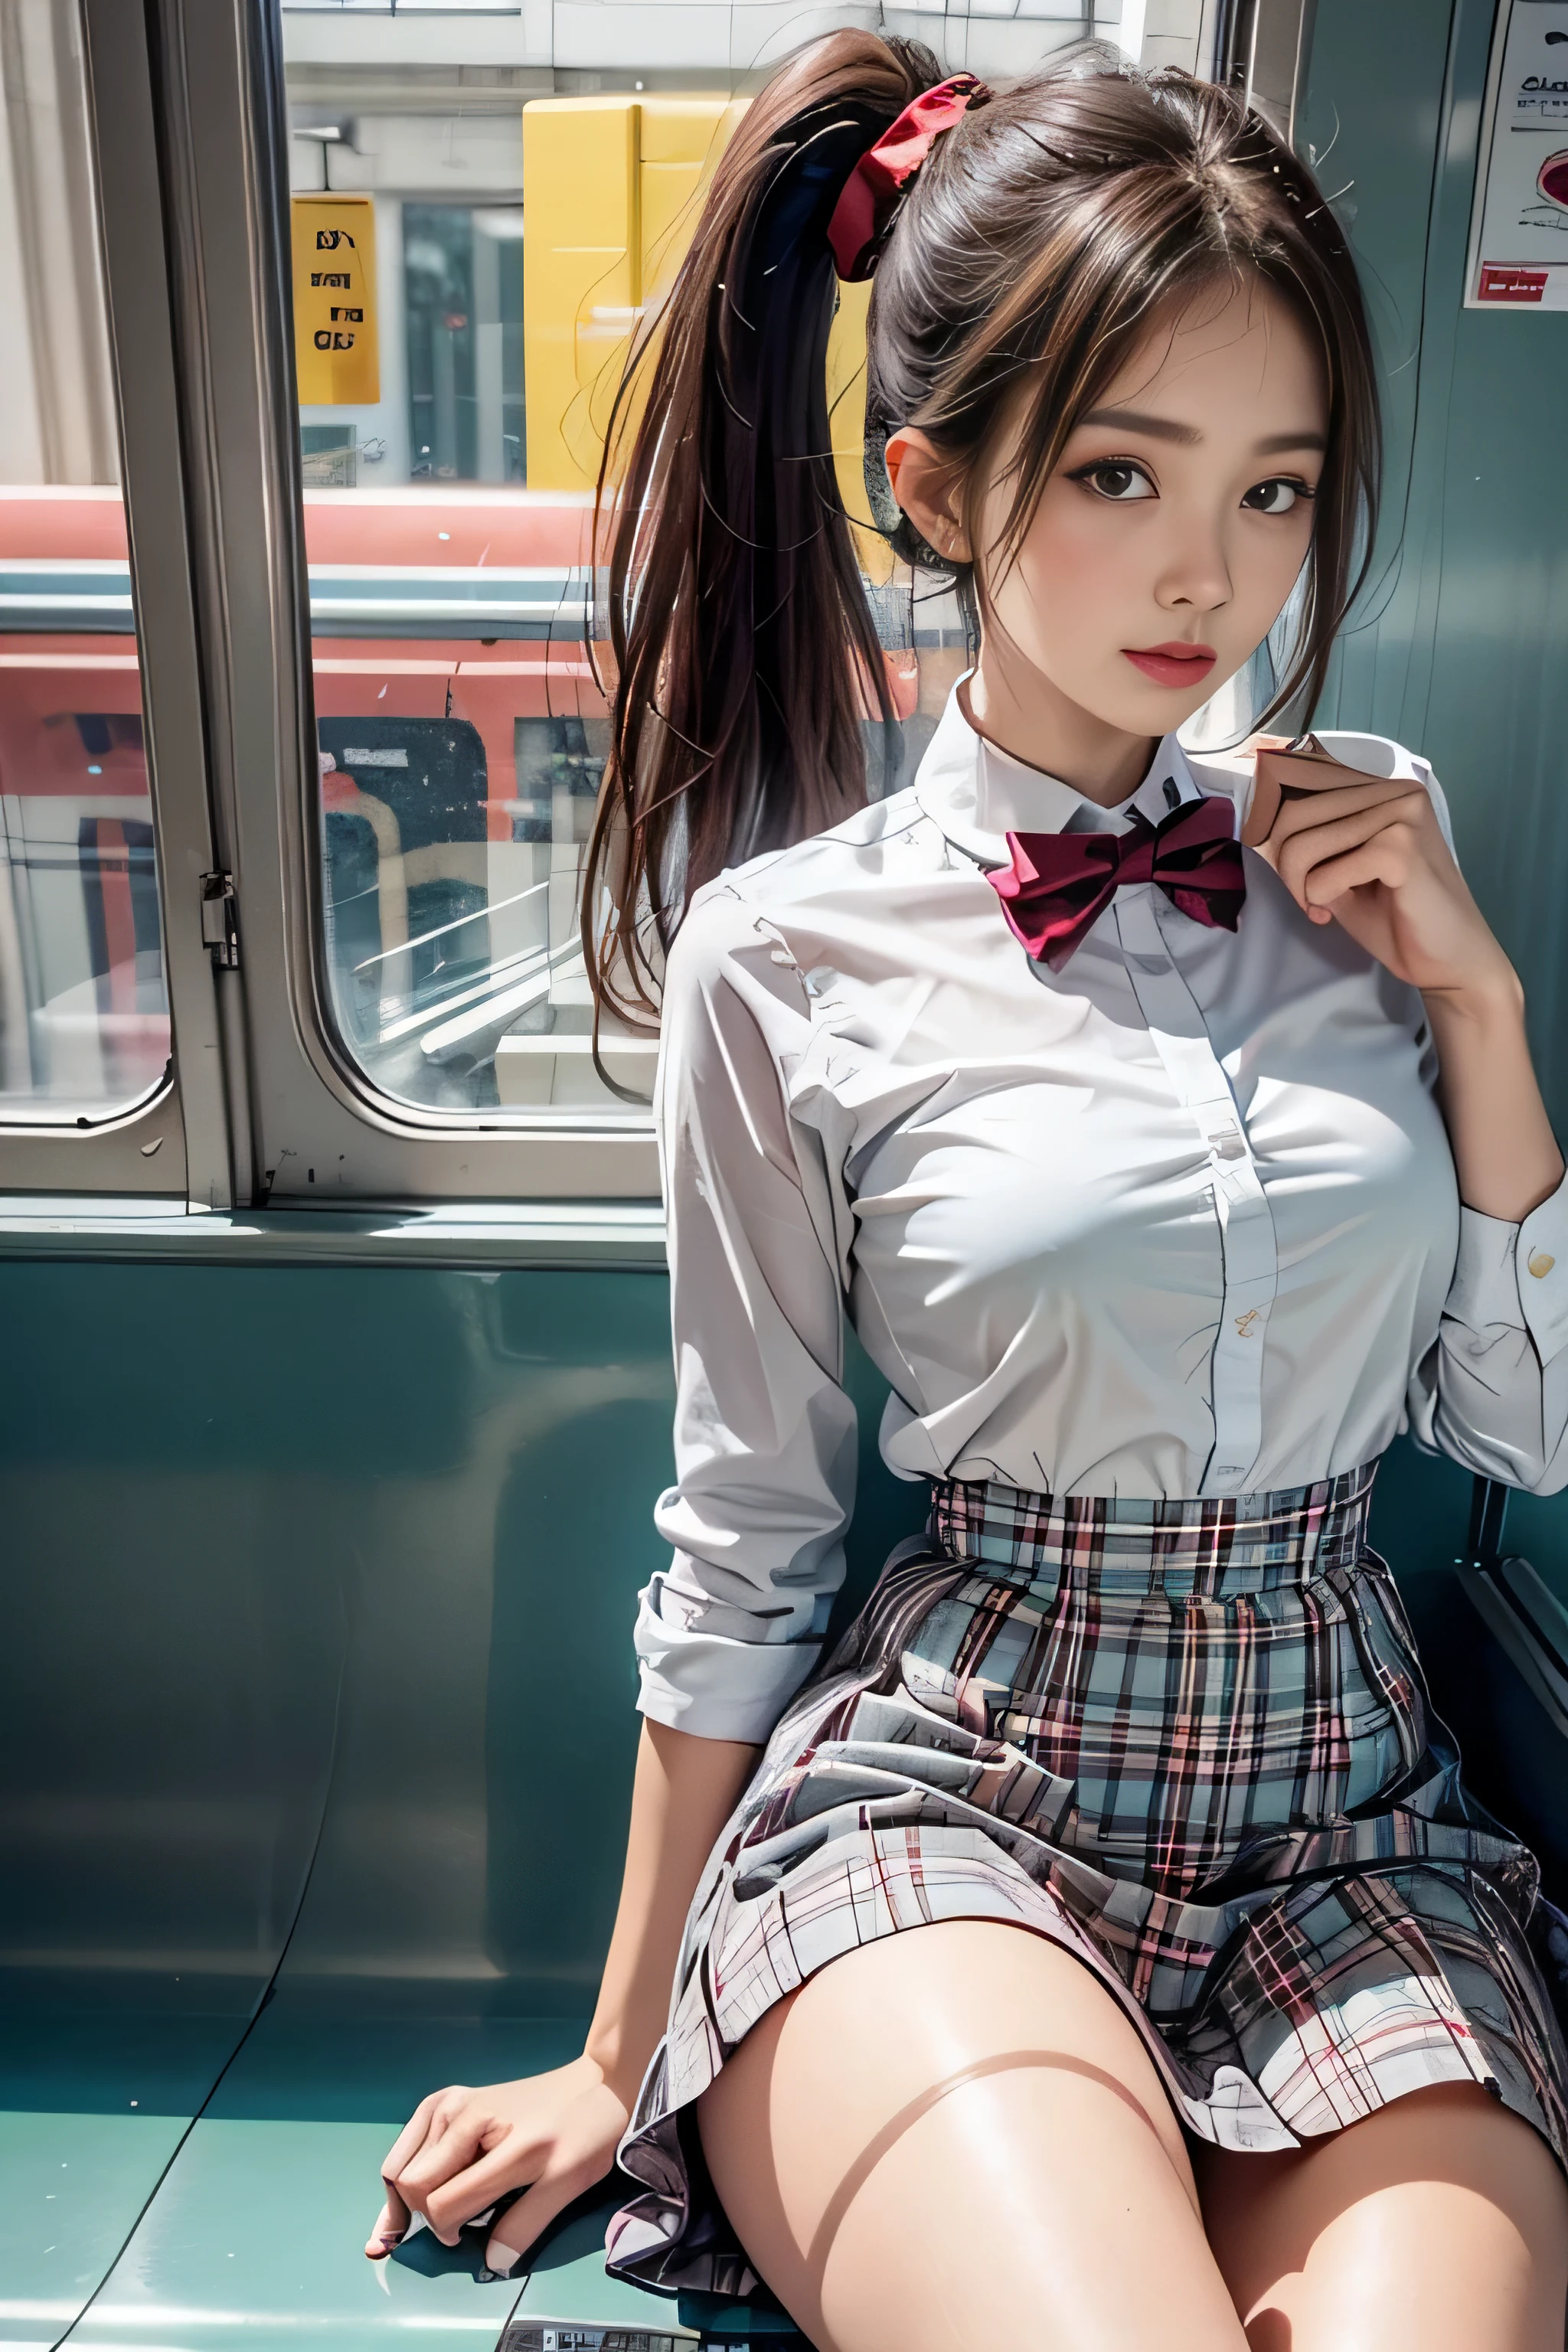 realistic, High resolution, soft light,1 female, alone, waist rises high, (detailed face),(Female student)（(A girl standing in front of a train seat))，colorful hair、shortcut，wear、(White blazer emblem on chest)、(translucent white blouse),(red bow tie)(check skirt),long hair、(ponytail)、((Panty shot)）、